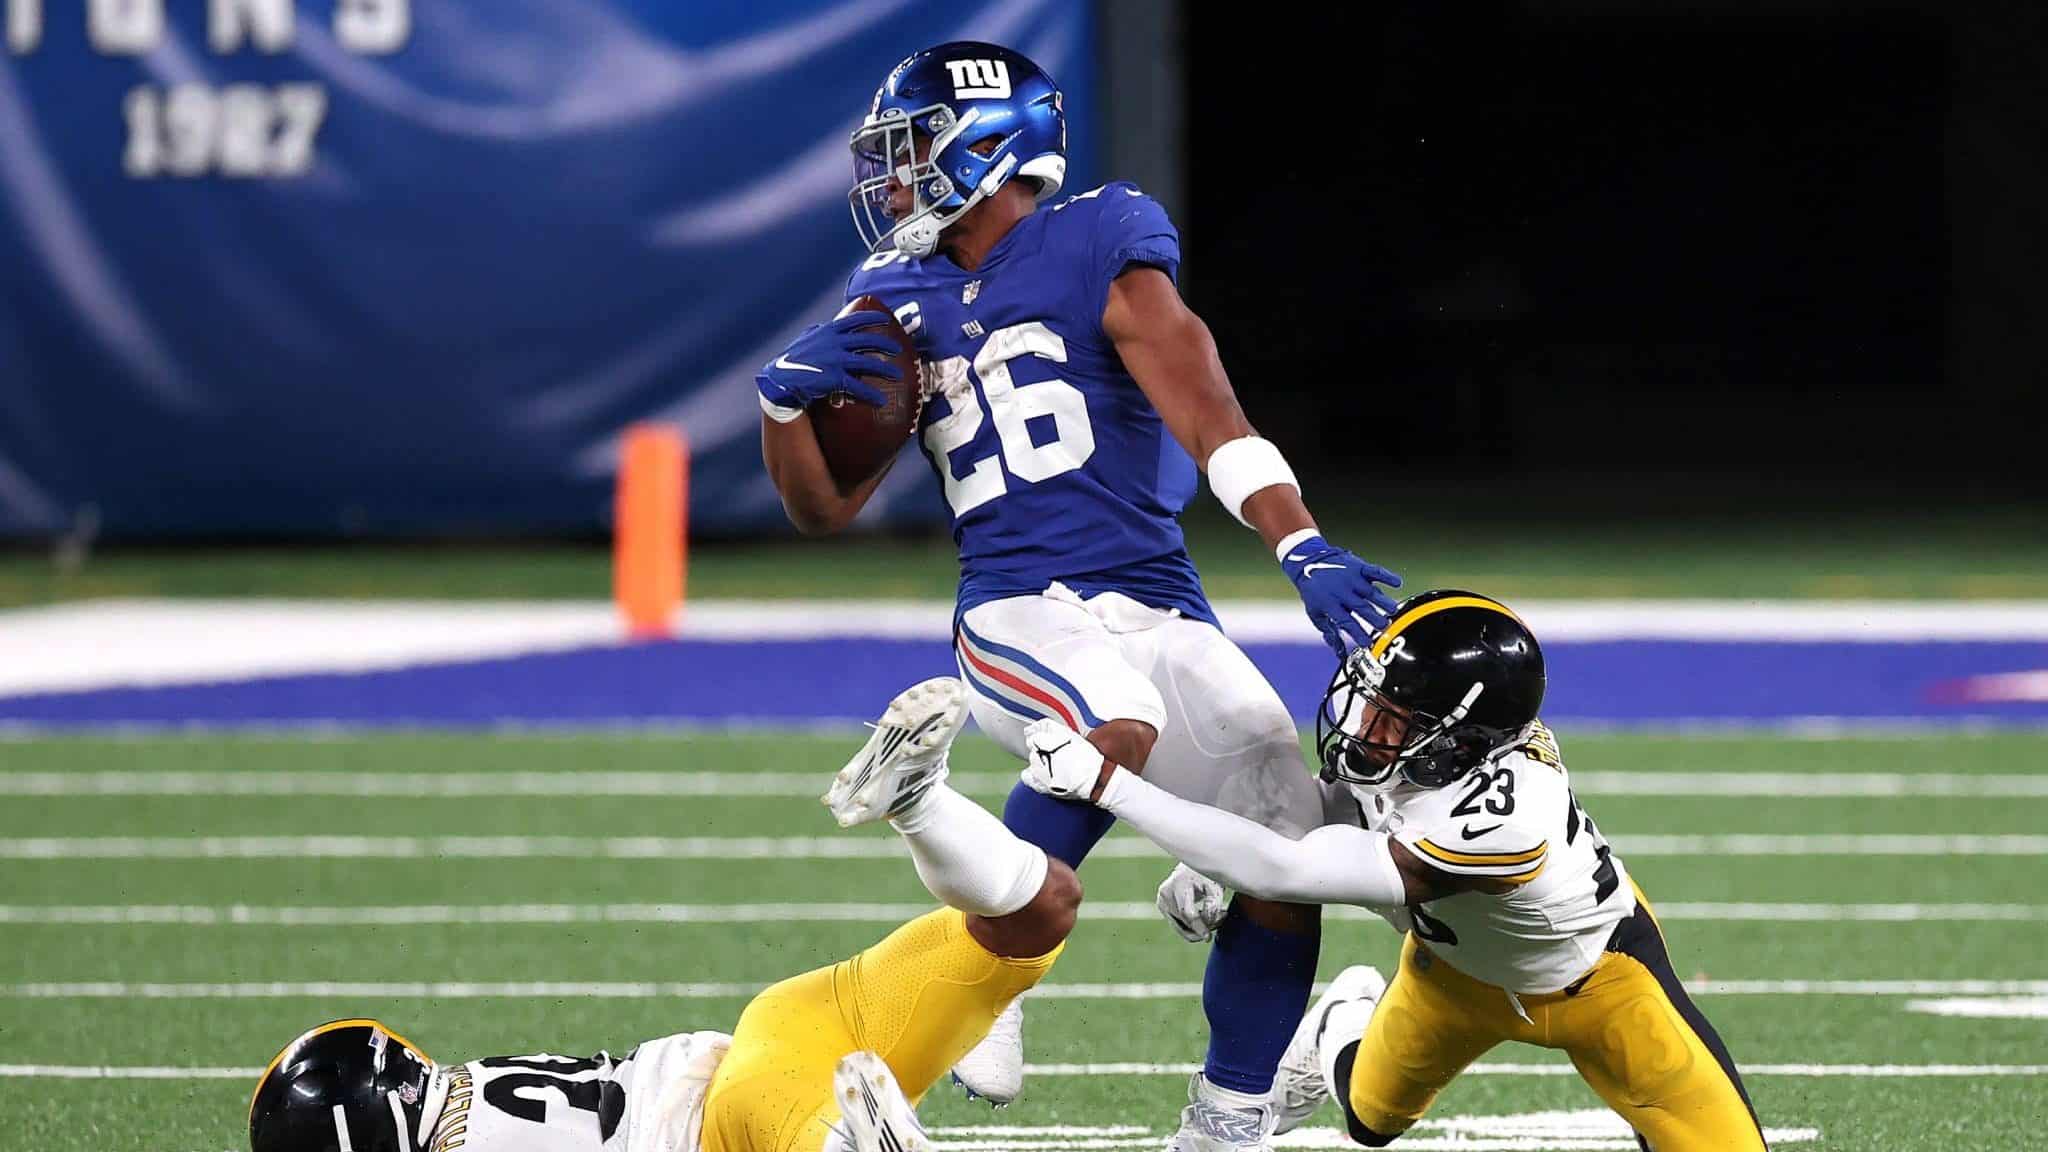 EAST RUTHERFORD, NEW JERSEY - SEPTEMBER 14: Saquon Barkley #26 of the New York Giants tries to break a tackle by Joe Haden #23 of the Pittsburgh Steelers during the second half in the game at MetLife Stadium on September 14, 2020 in East Rutherford, New Jersey.